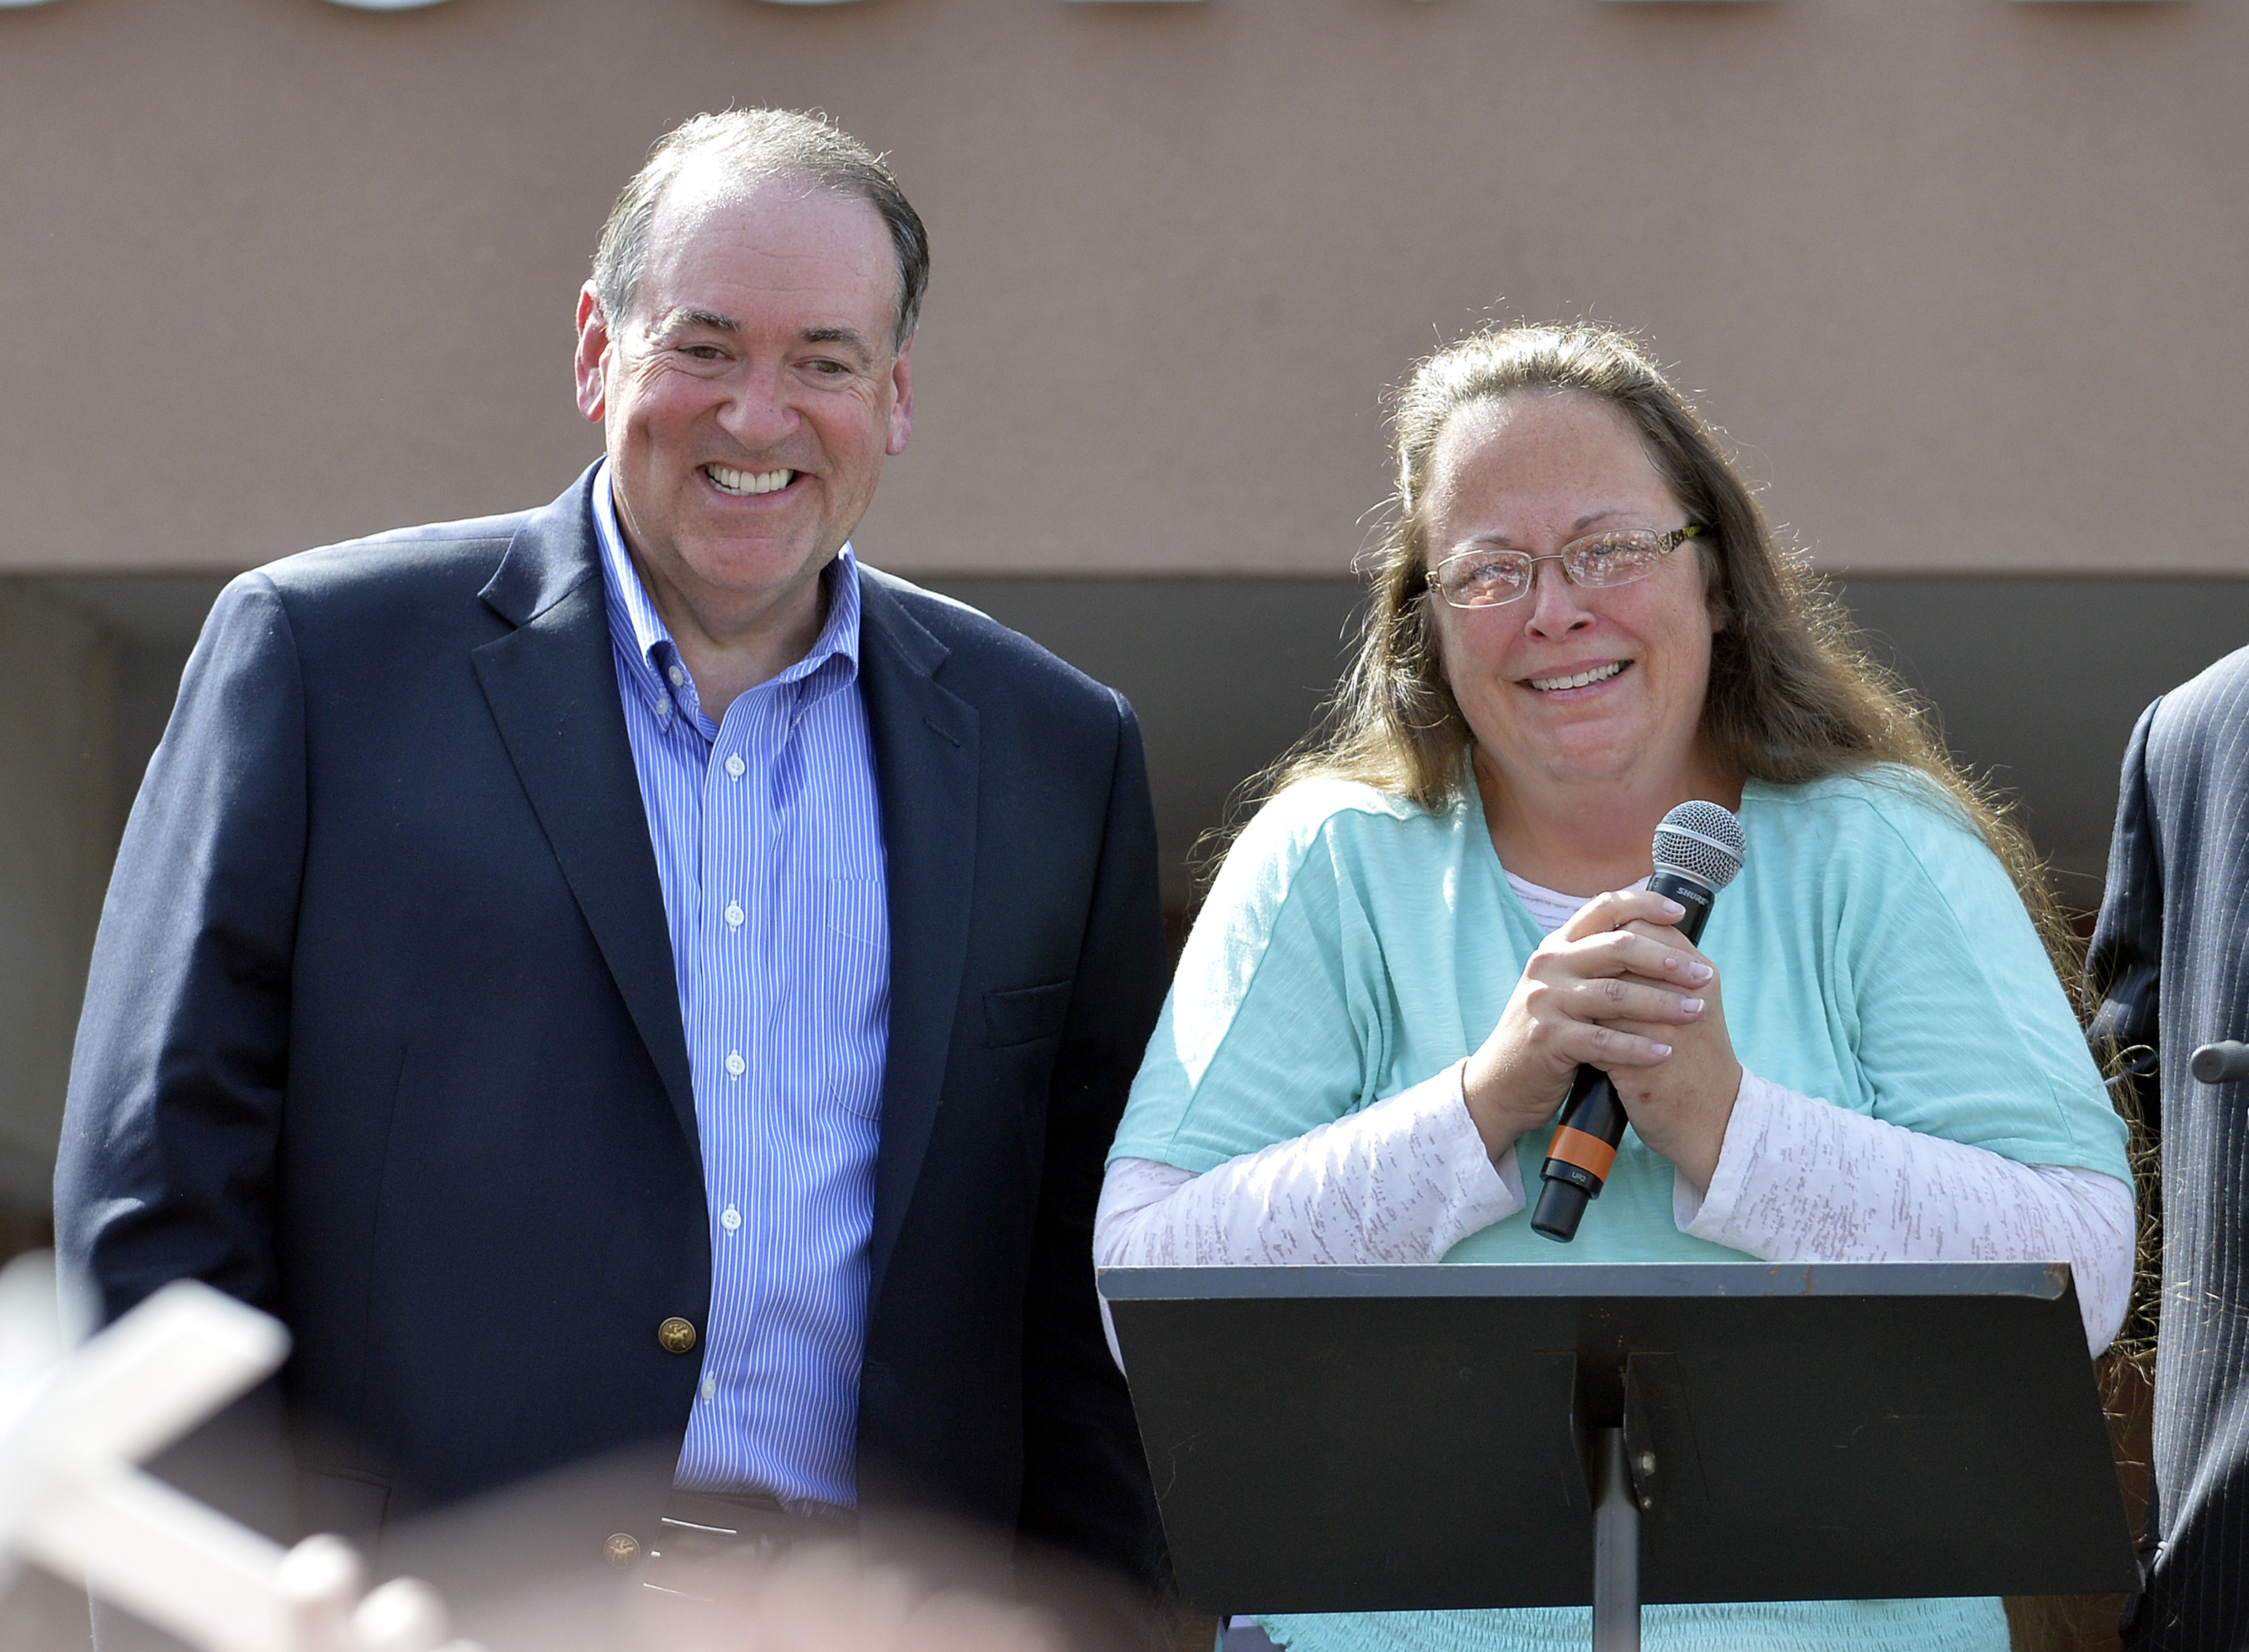 Rowan County Clerk Kim Davis, with Republican presidential candidate Mike Huckabee at her side, greets the crowd after being released from the Carter County Detention Center on Sept. 8, 2015, in Grayson, Ky. (Timothy D. Easley—AP)